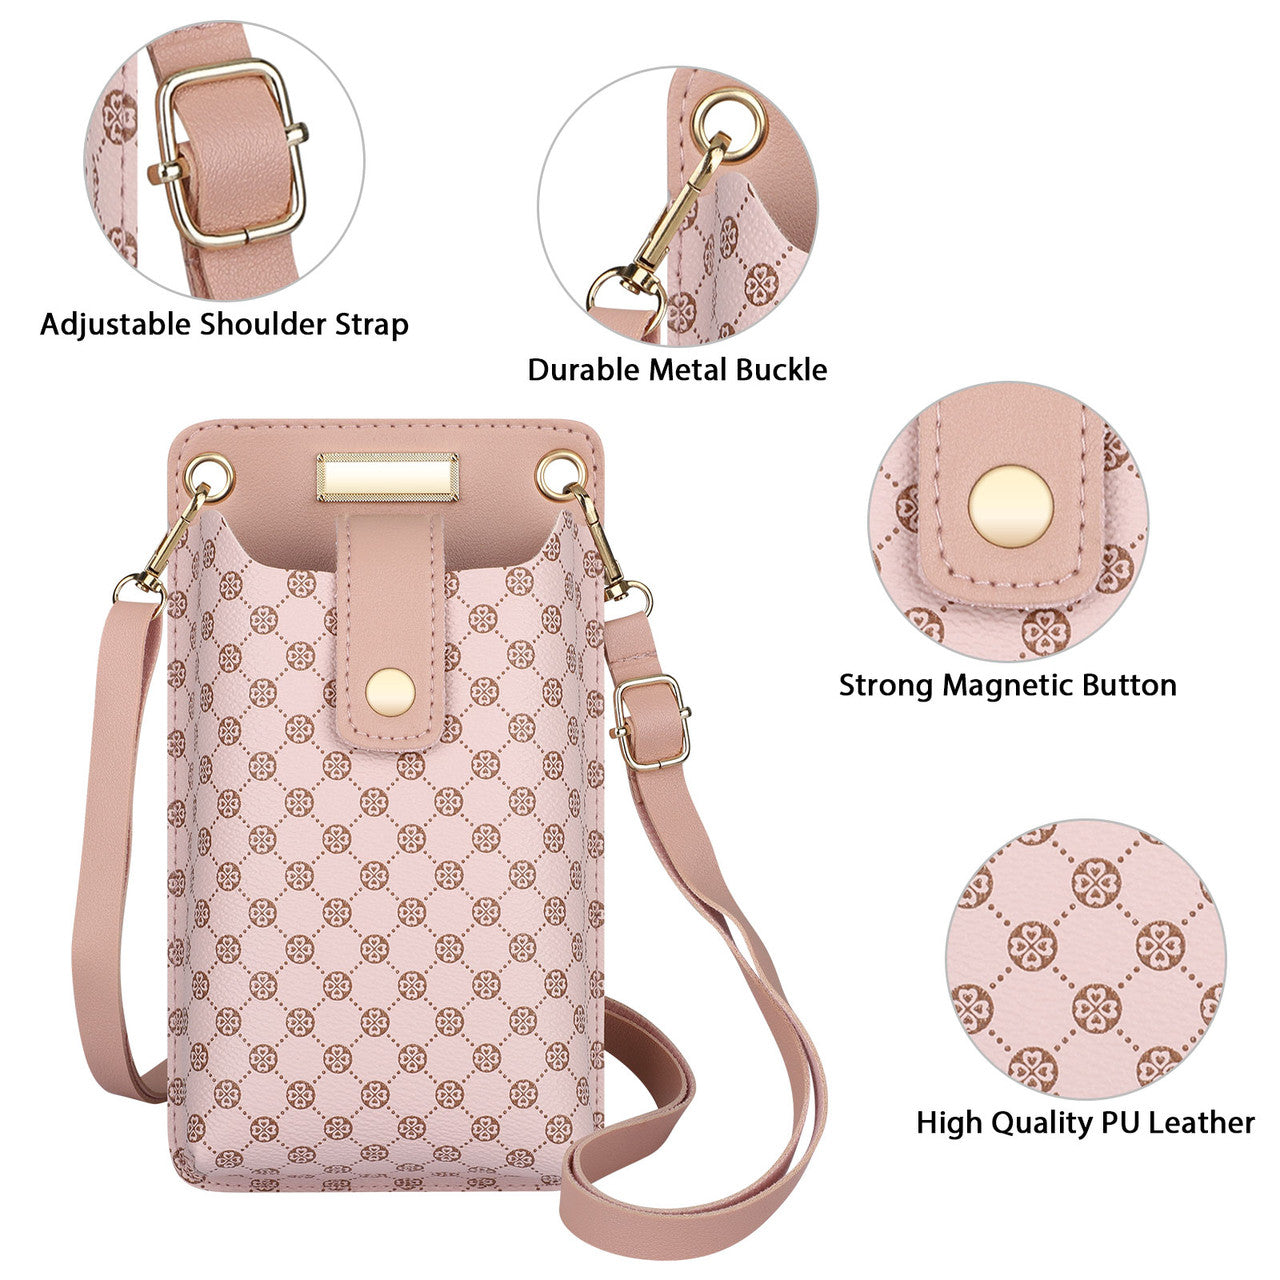 Cell Phone Purse Small Crossbody Bags for Women with Card Slots - Cellphone Shoulder Bags Card Purse Clutch Compatible (Pink)